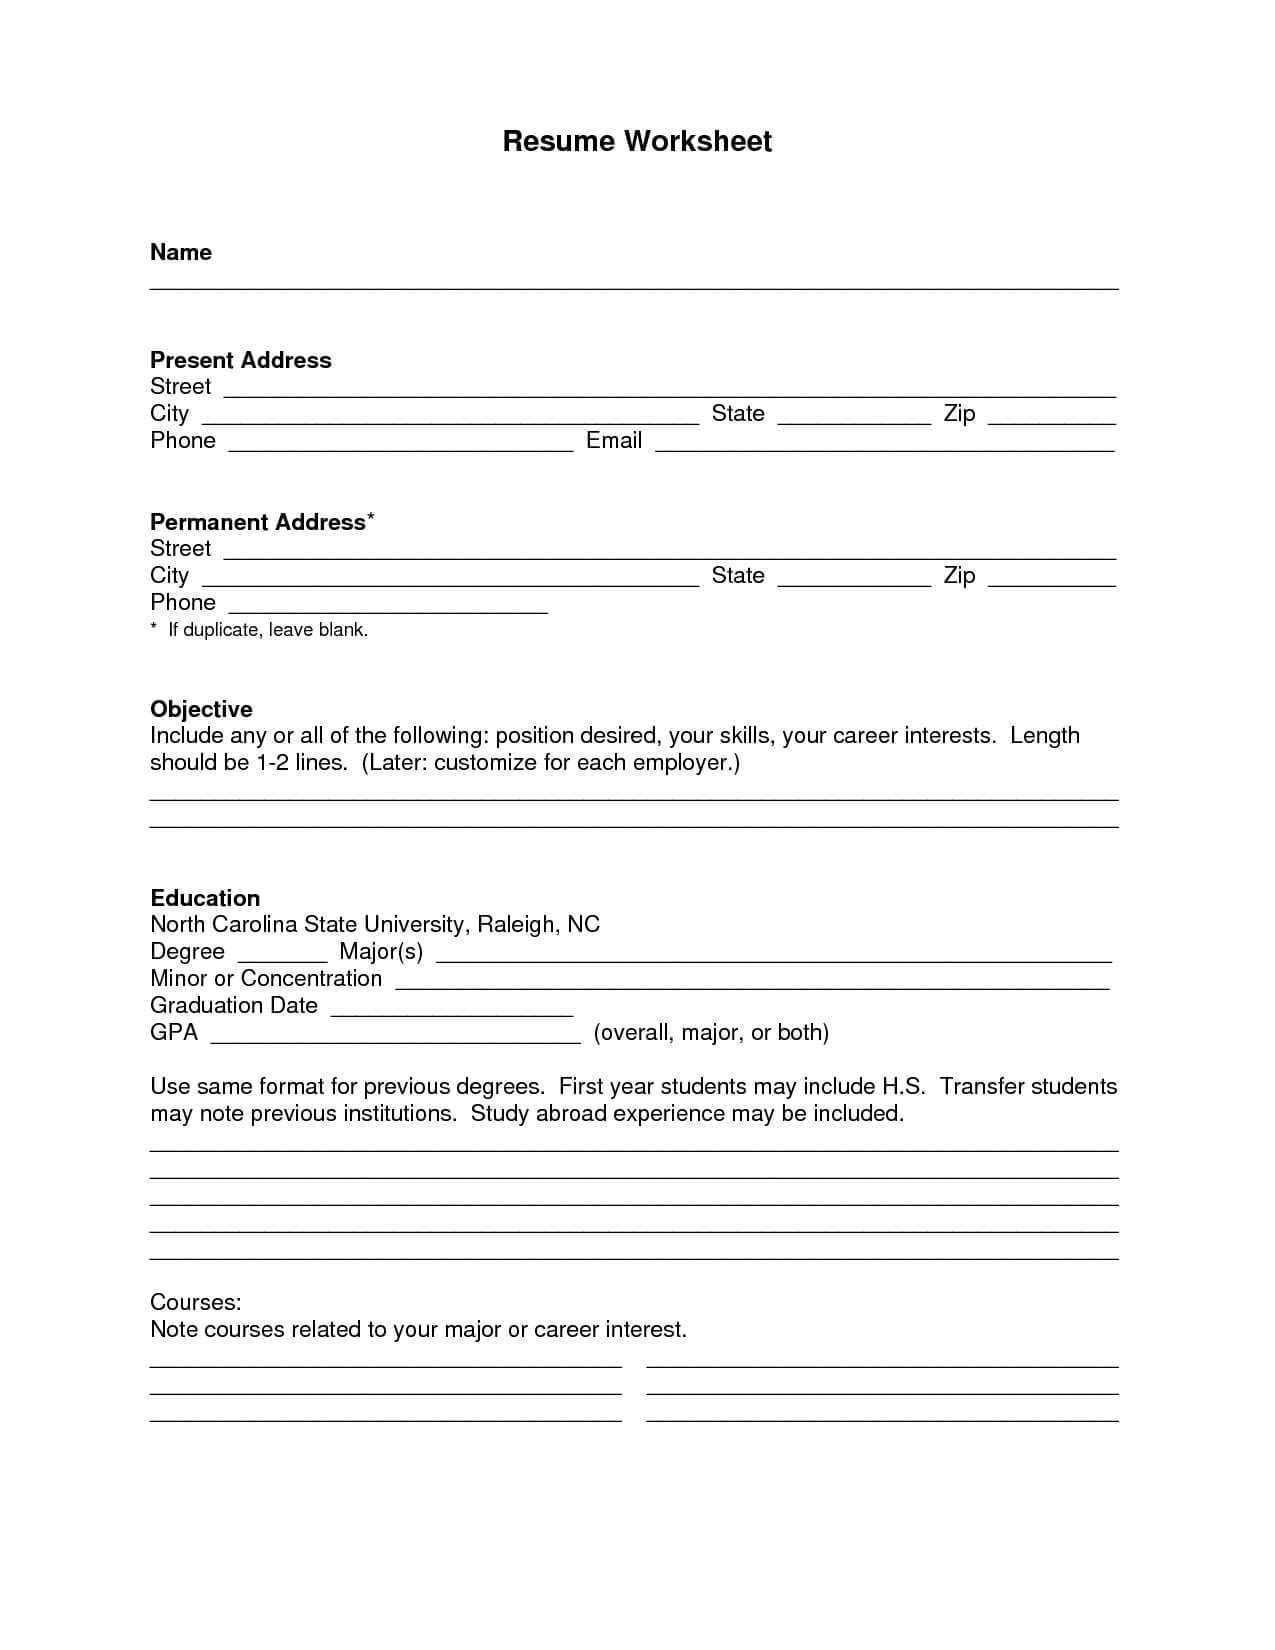 Blank Resume Template Pdf | Blank Resume With Free Blank Resume Templates For Microsoft Word